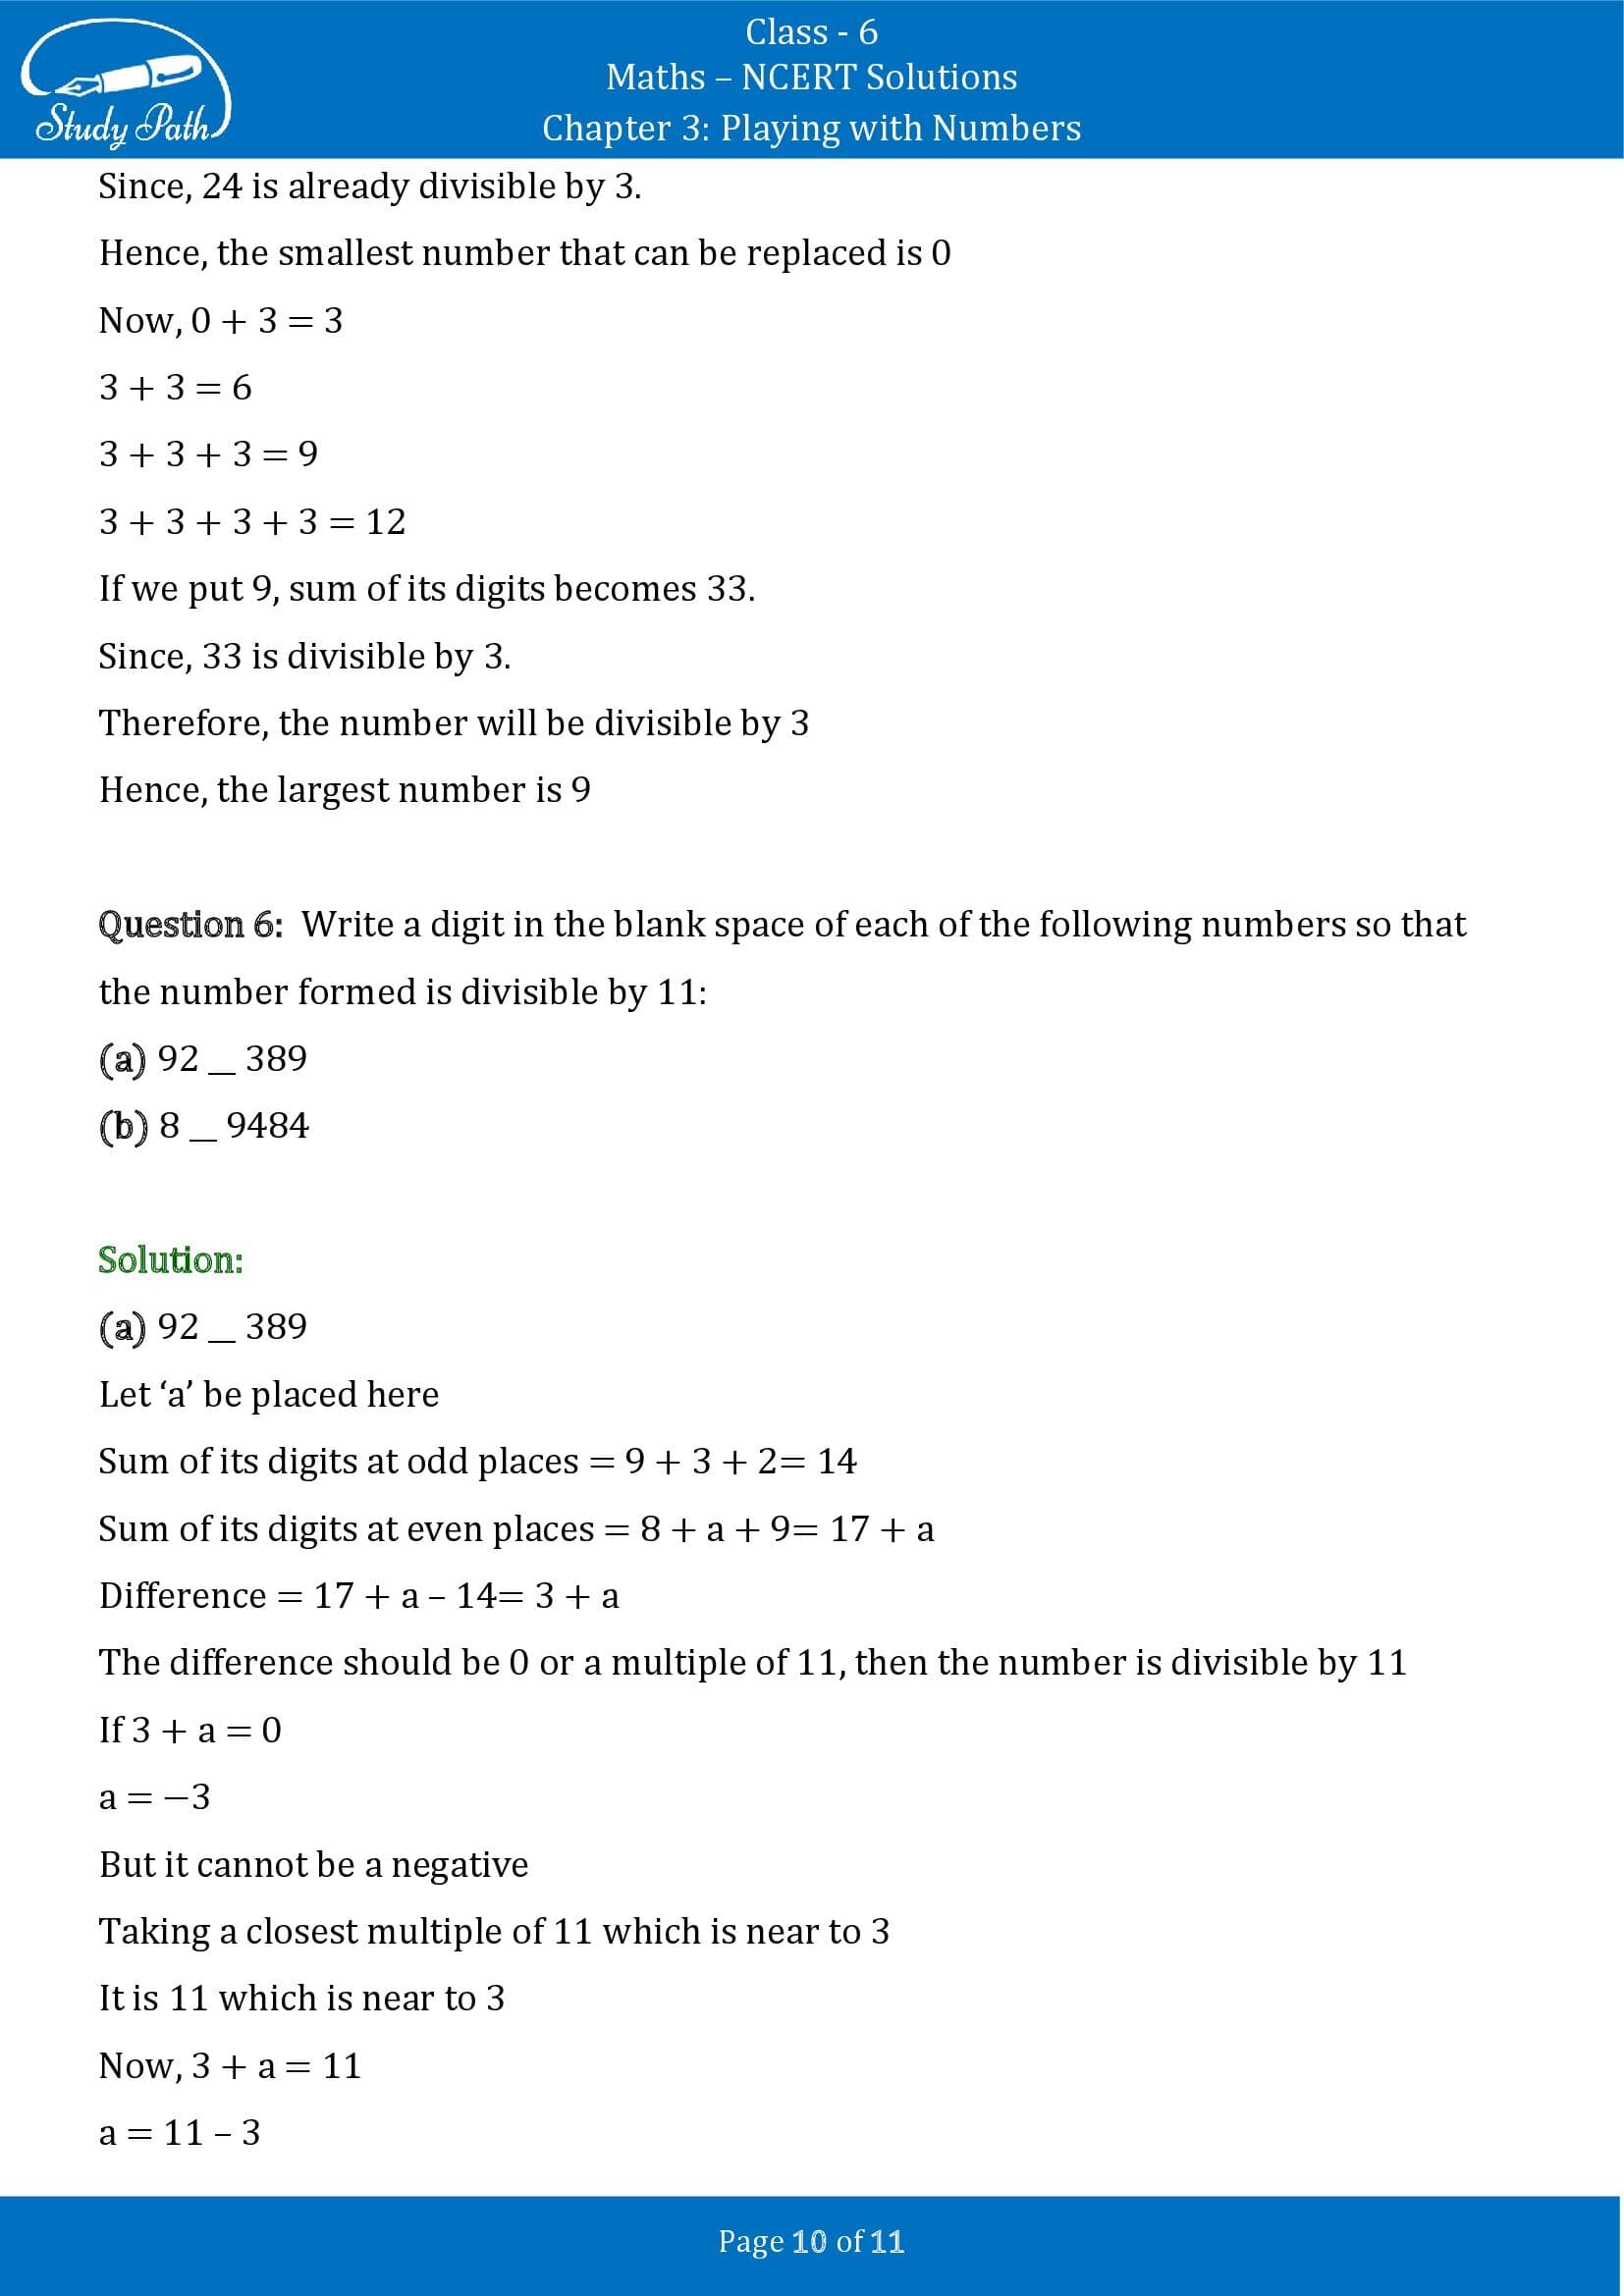 NCERT Solutions for Class 6 Maths Chapter 3 Playing with Numbers Exercise 3.3 00010